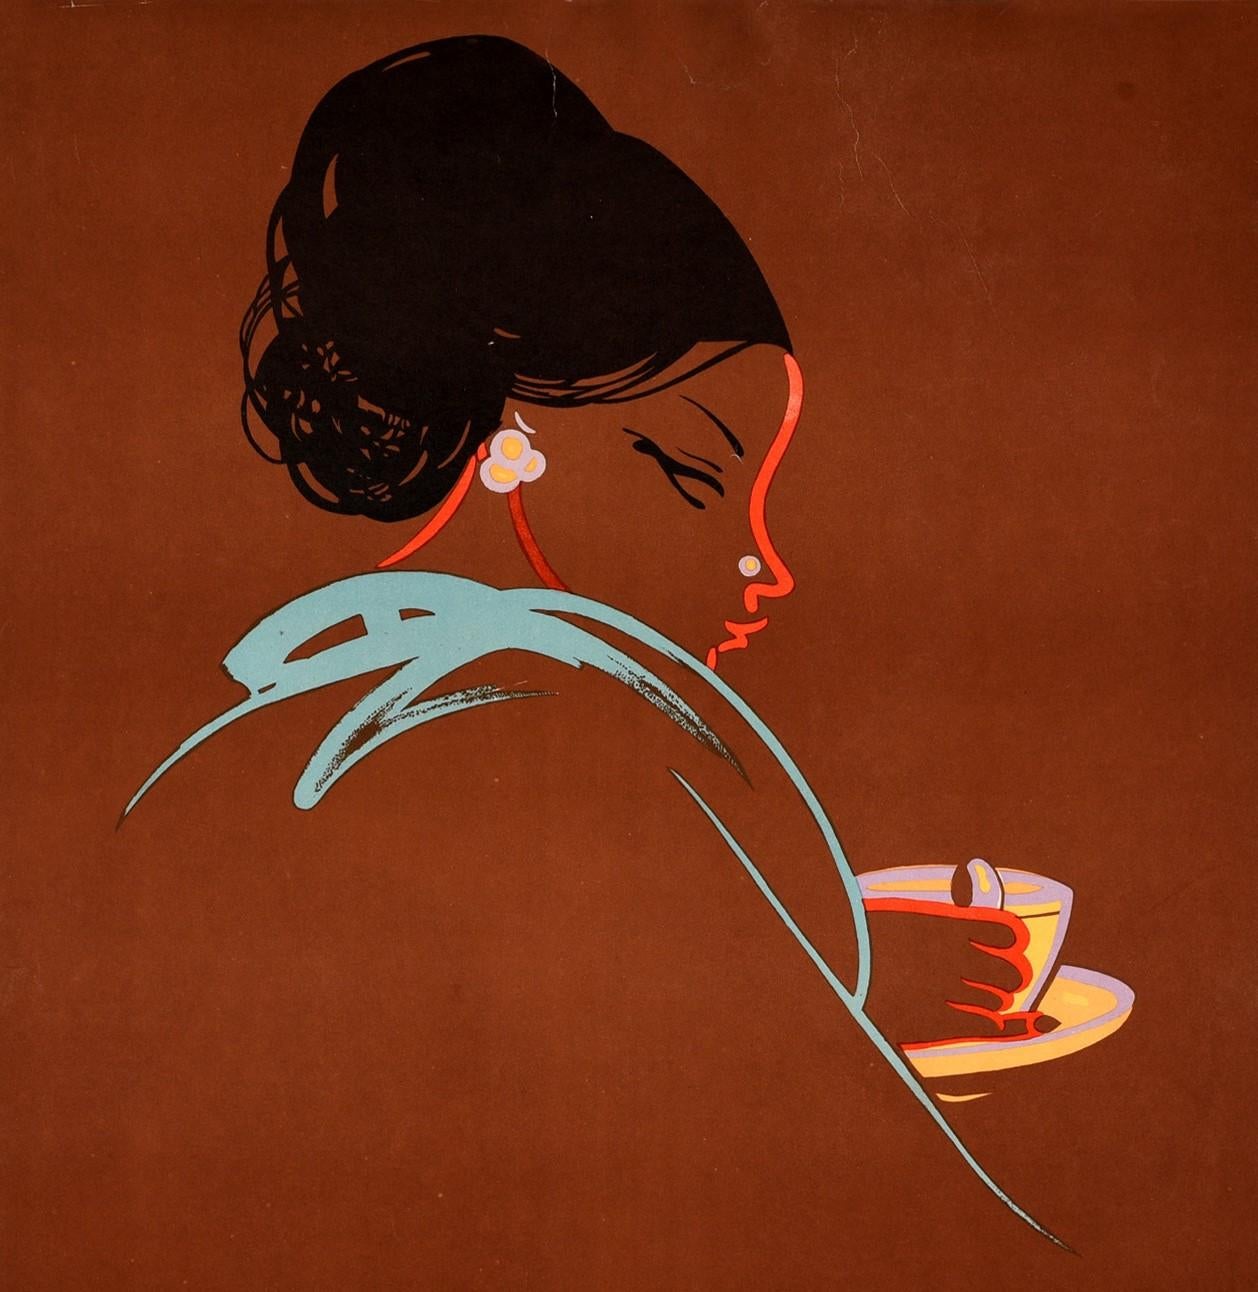 Original vintage drink advertising poster for Indian Coffee The Cup That XL's issued by the Coffee Board Bangalore featuring a colourful stylised illustration of a lady drinking a cup of coffee against a brown background with the bold blue and